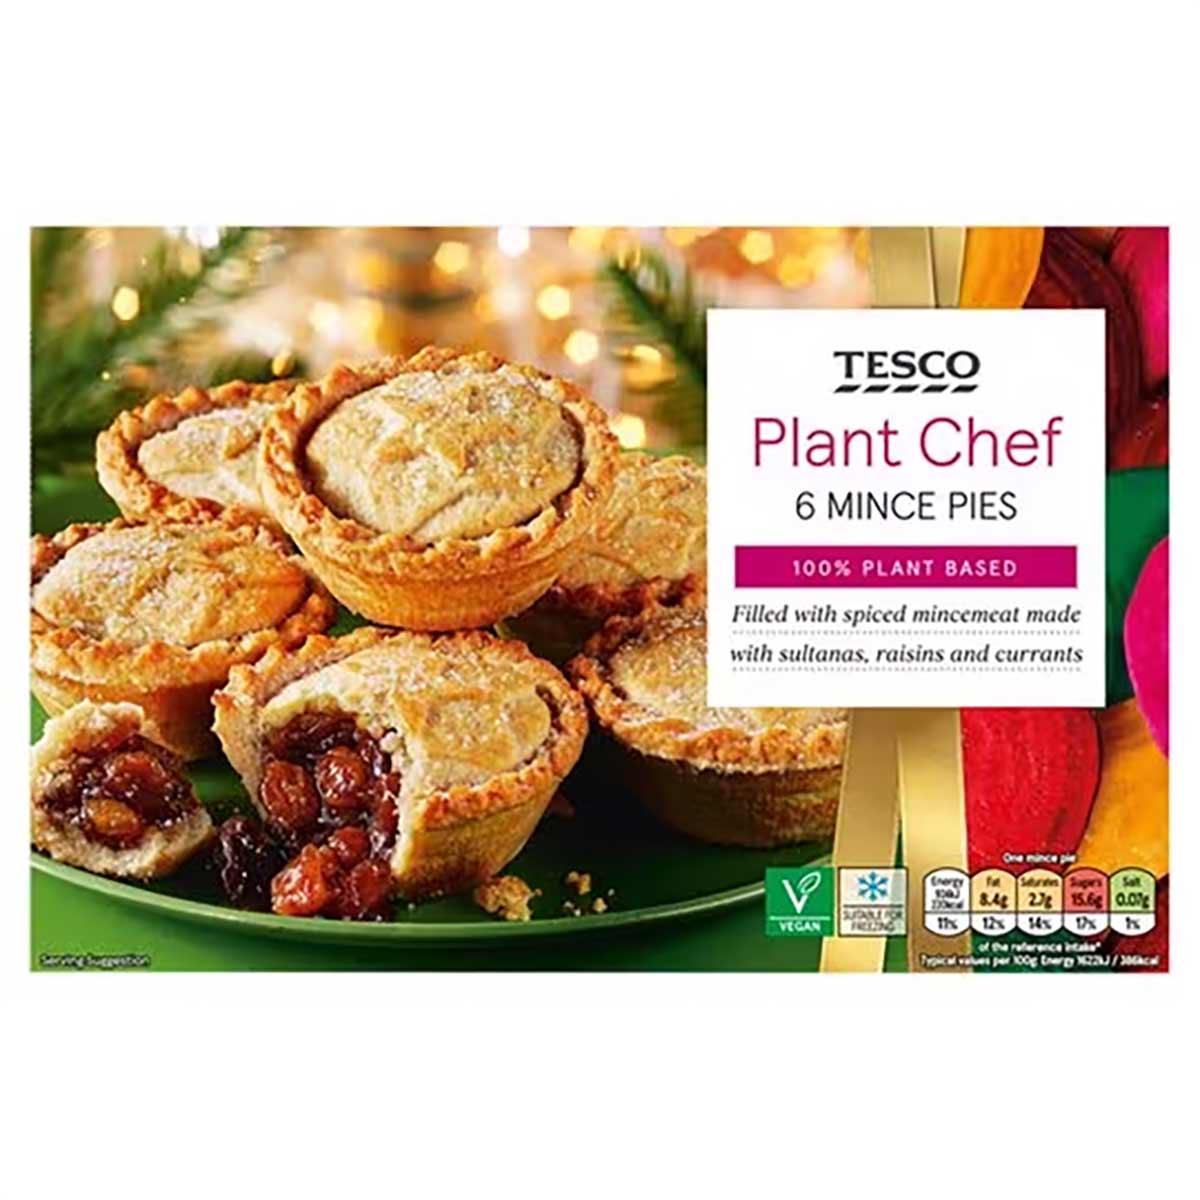 Tesco Plant Chef Mince Pies To Buy